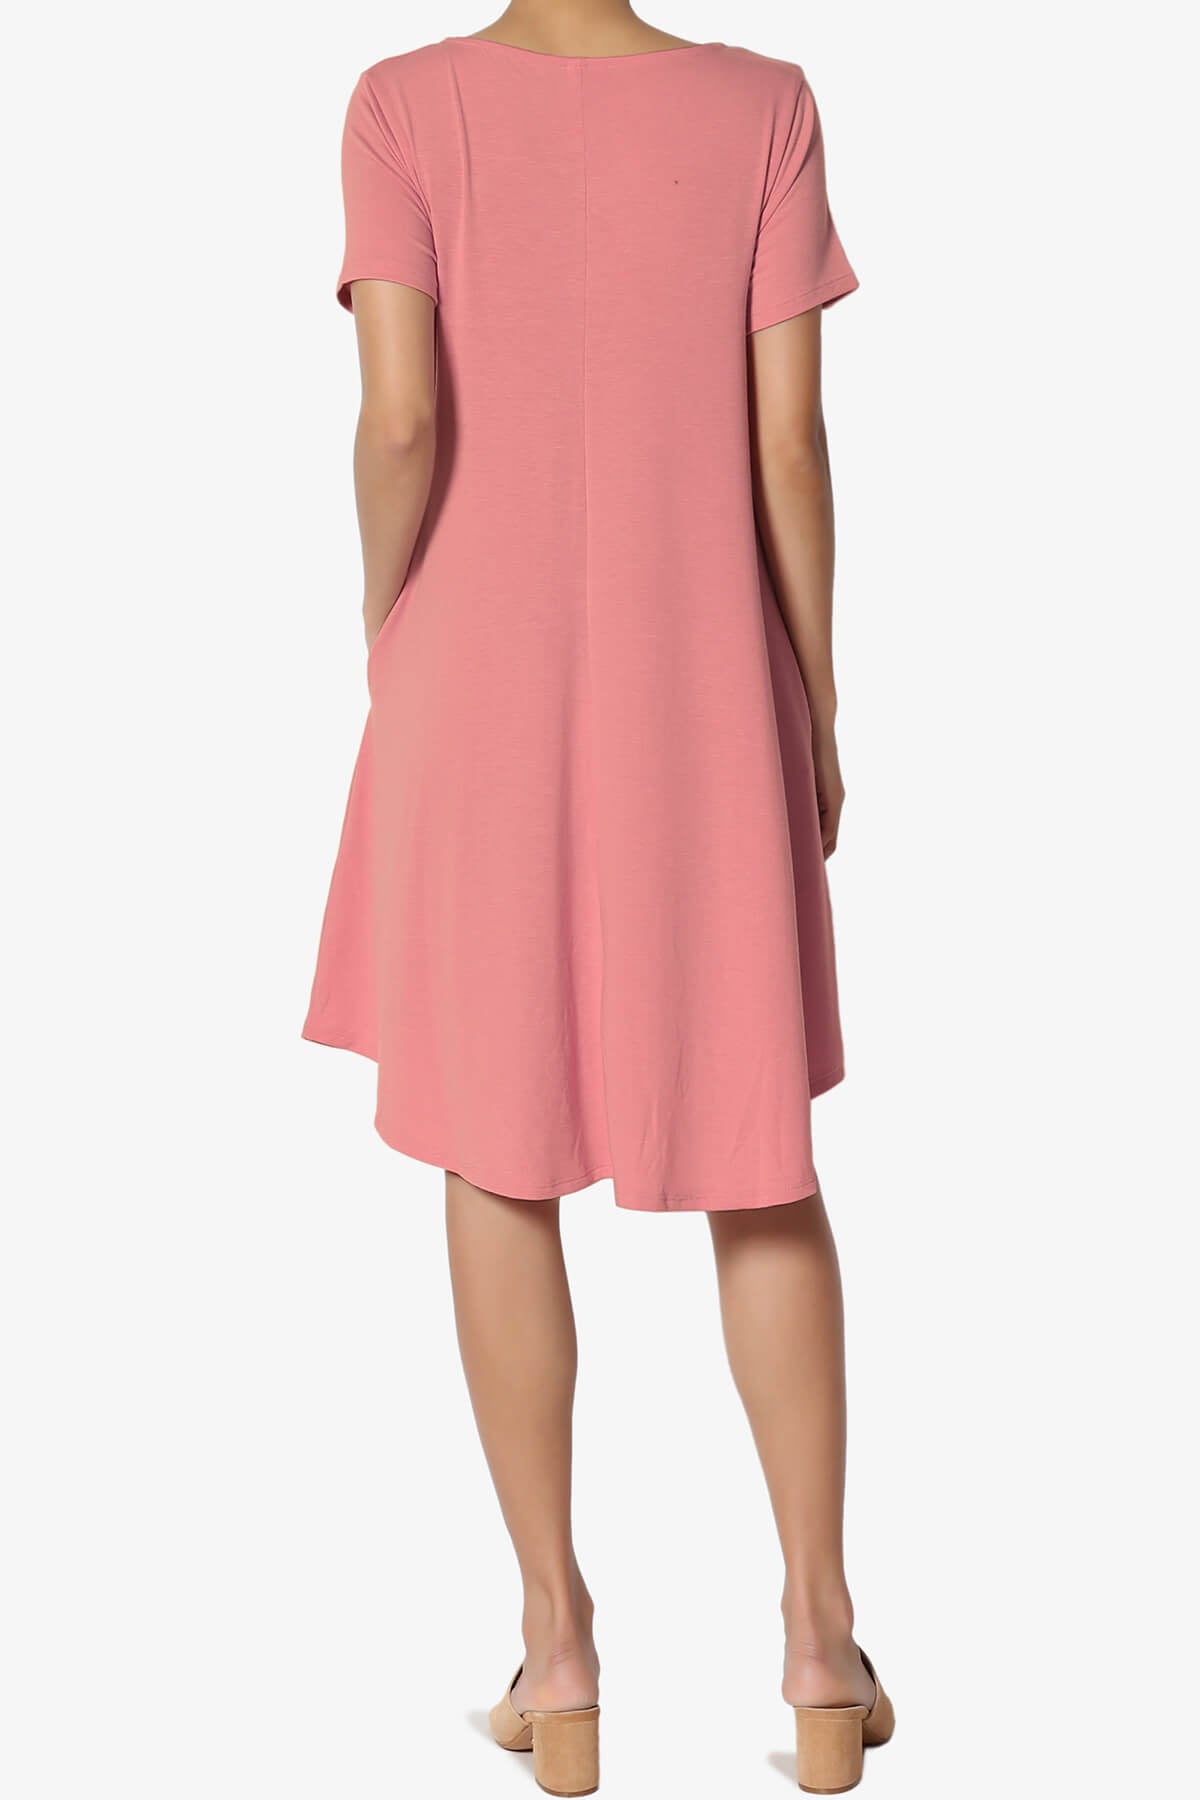 Load image into Gallery viewer, Amella Strappy Scoop Neck Pocket Dress ASH ROSE_2
